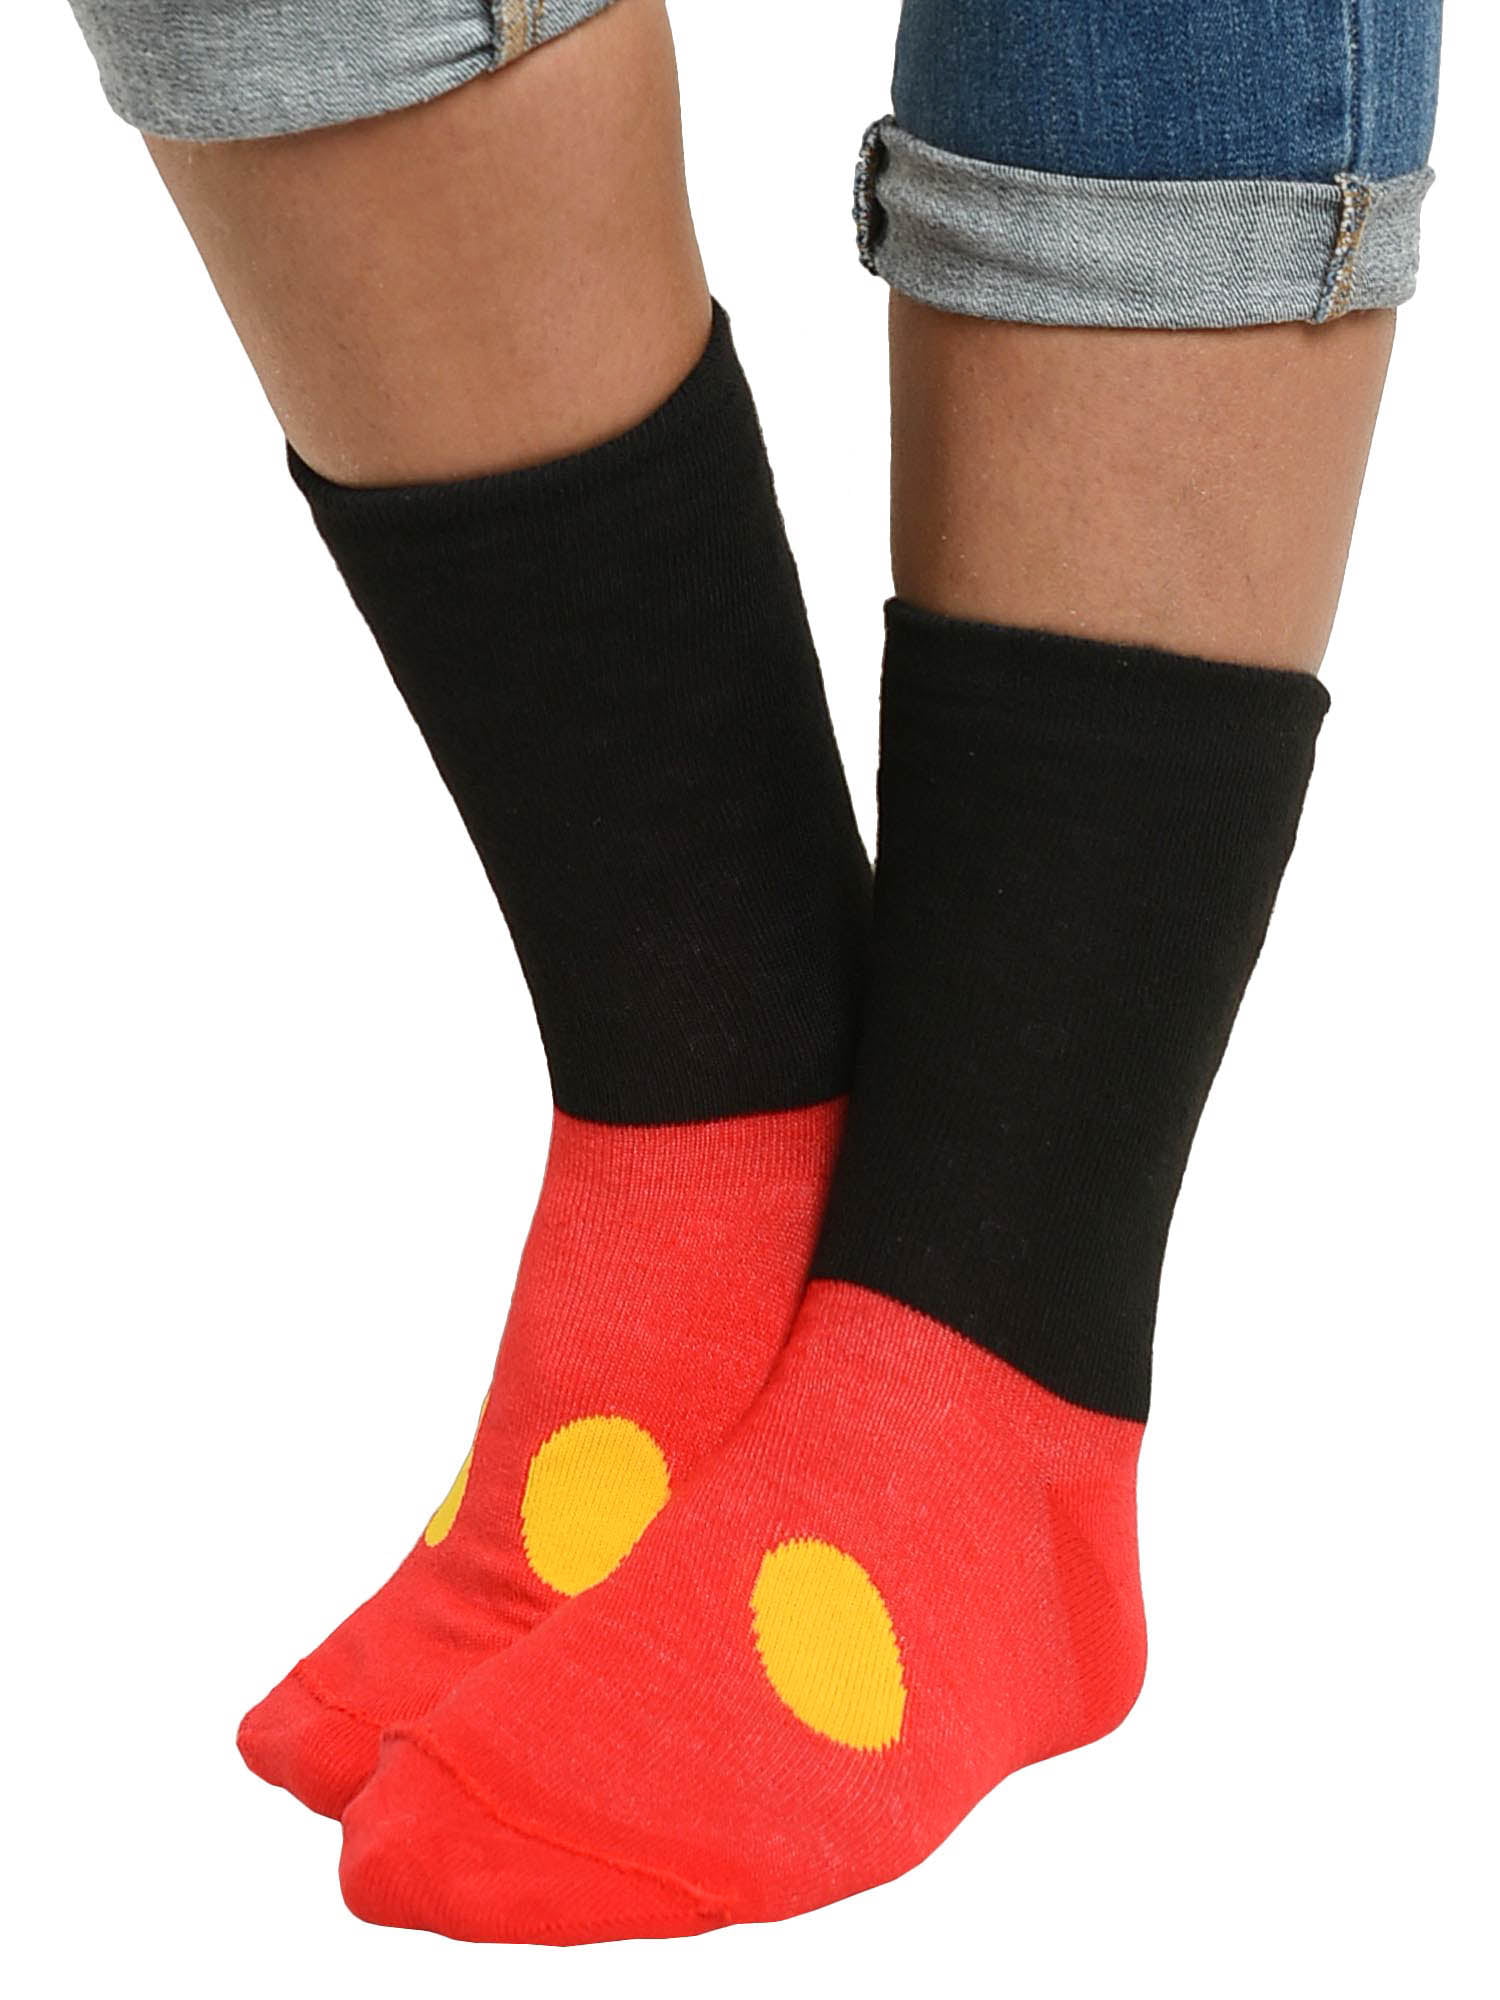 Disney Parks Mickey Mouse Body Parts Adult Socks New with Tags